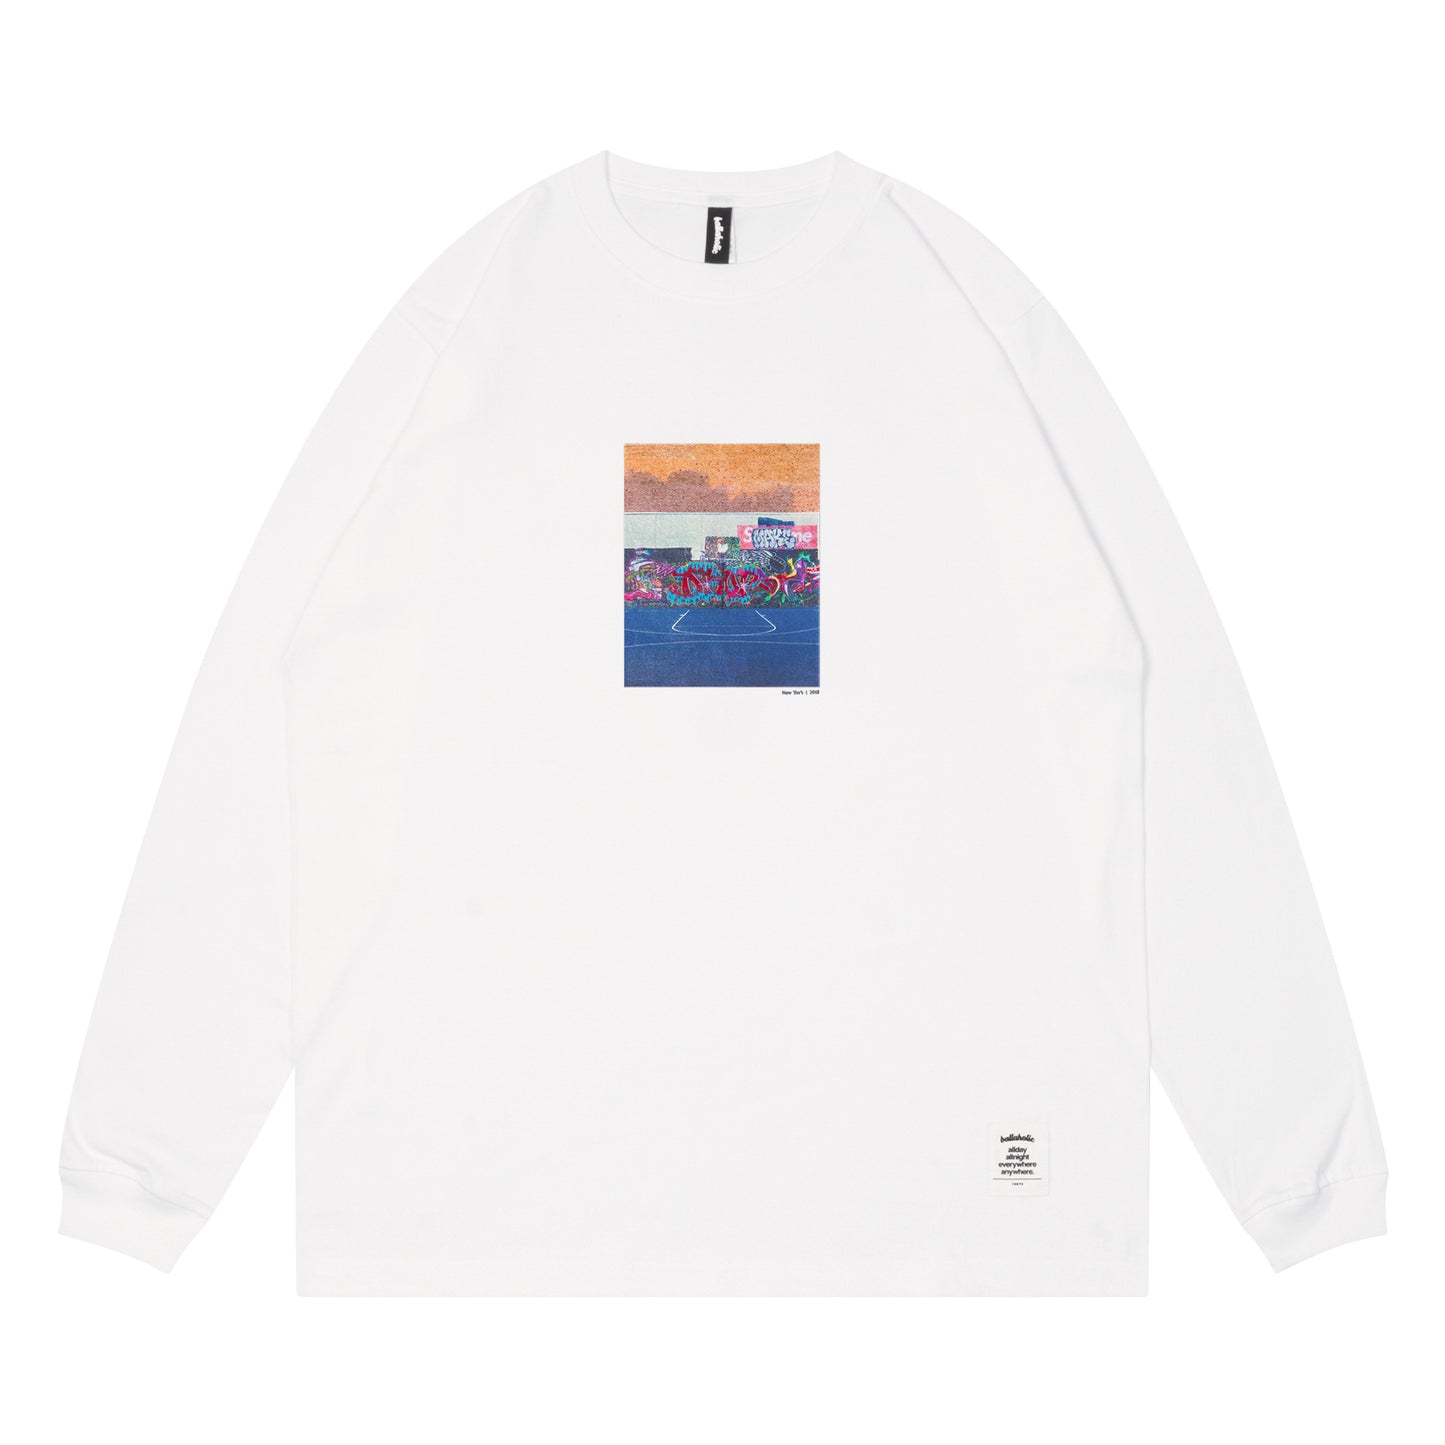 Photo Long Tee -Lower East Side Playground- (white)